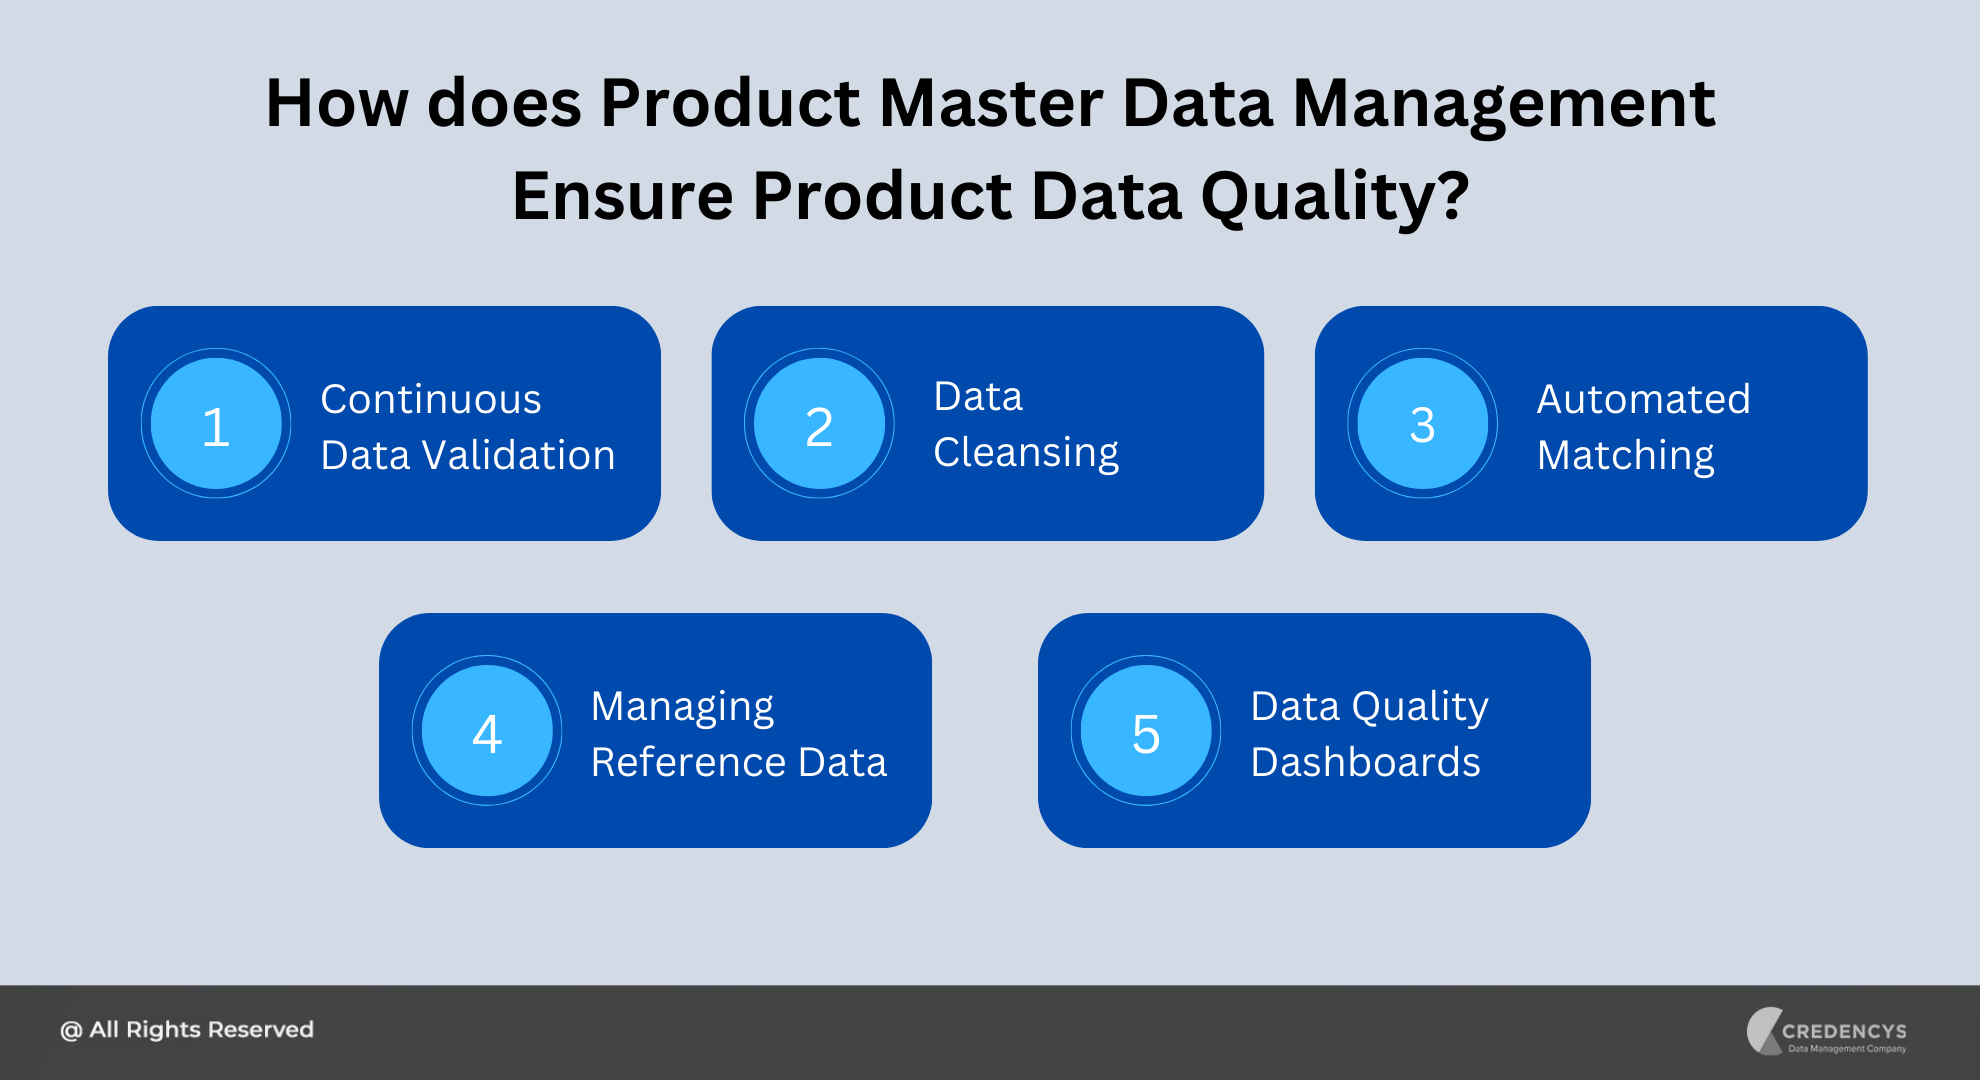 How does Product Master Data Management Ensure Product Data Quality